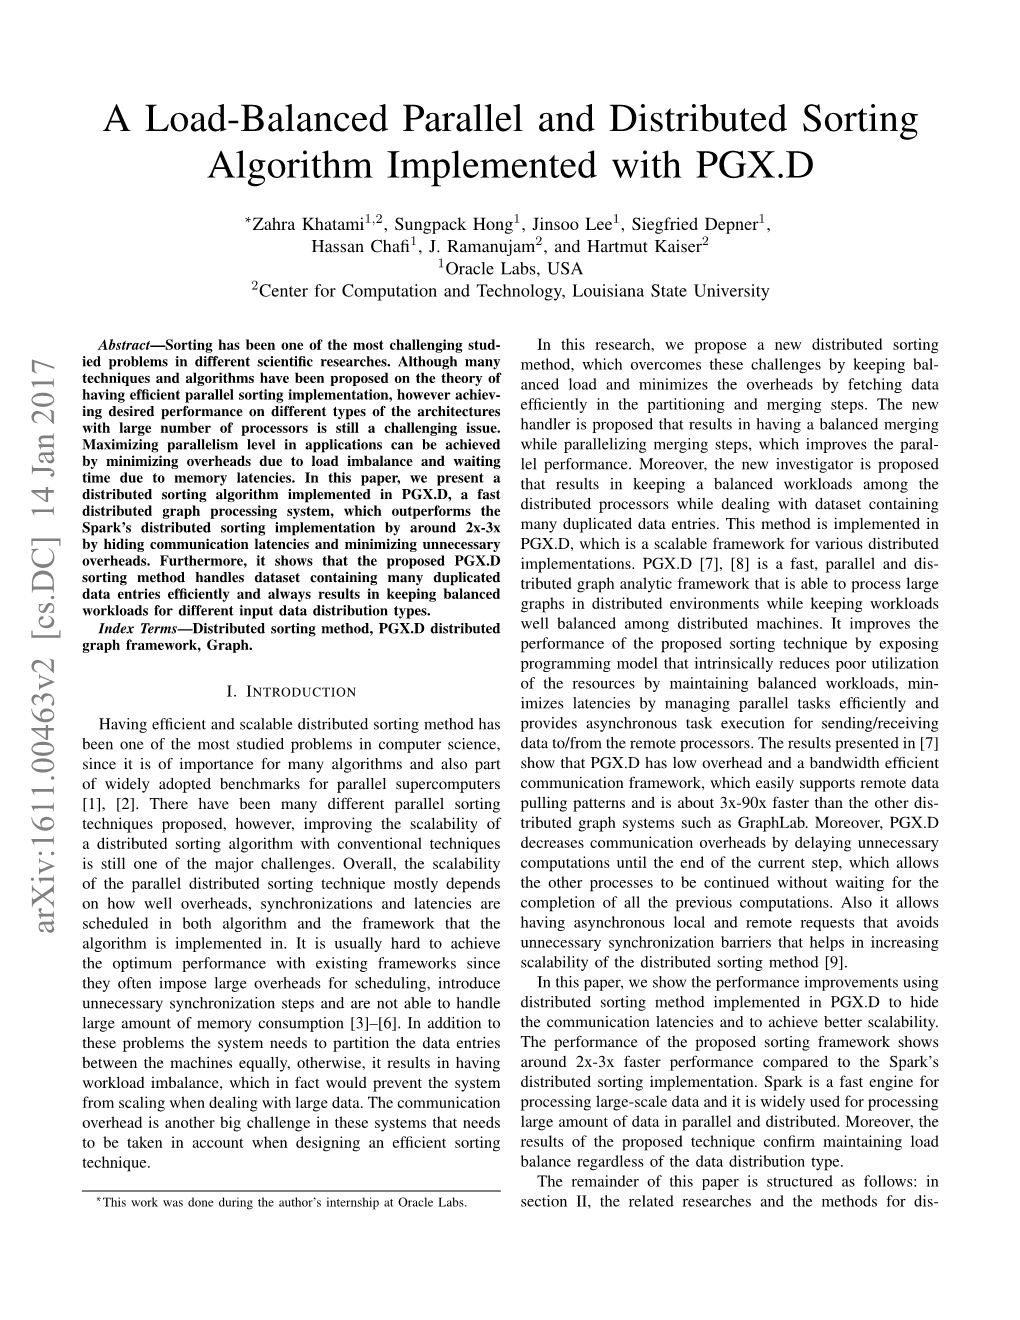 A Load-Balanced Parallel and Distributed Sorting Algorithm Implemented with PGX.D